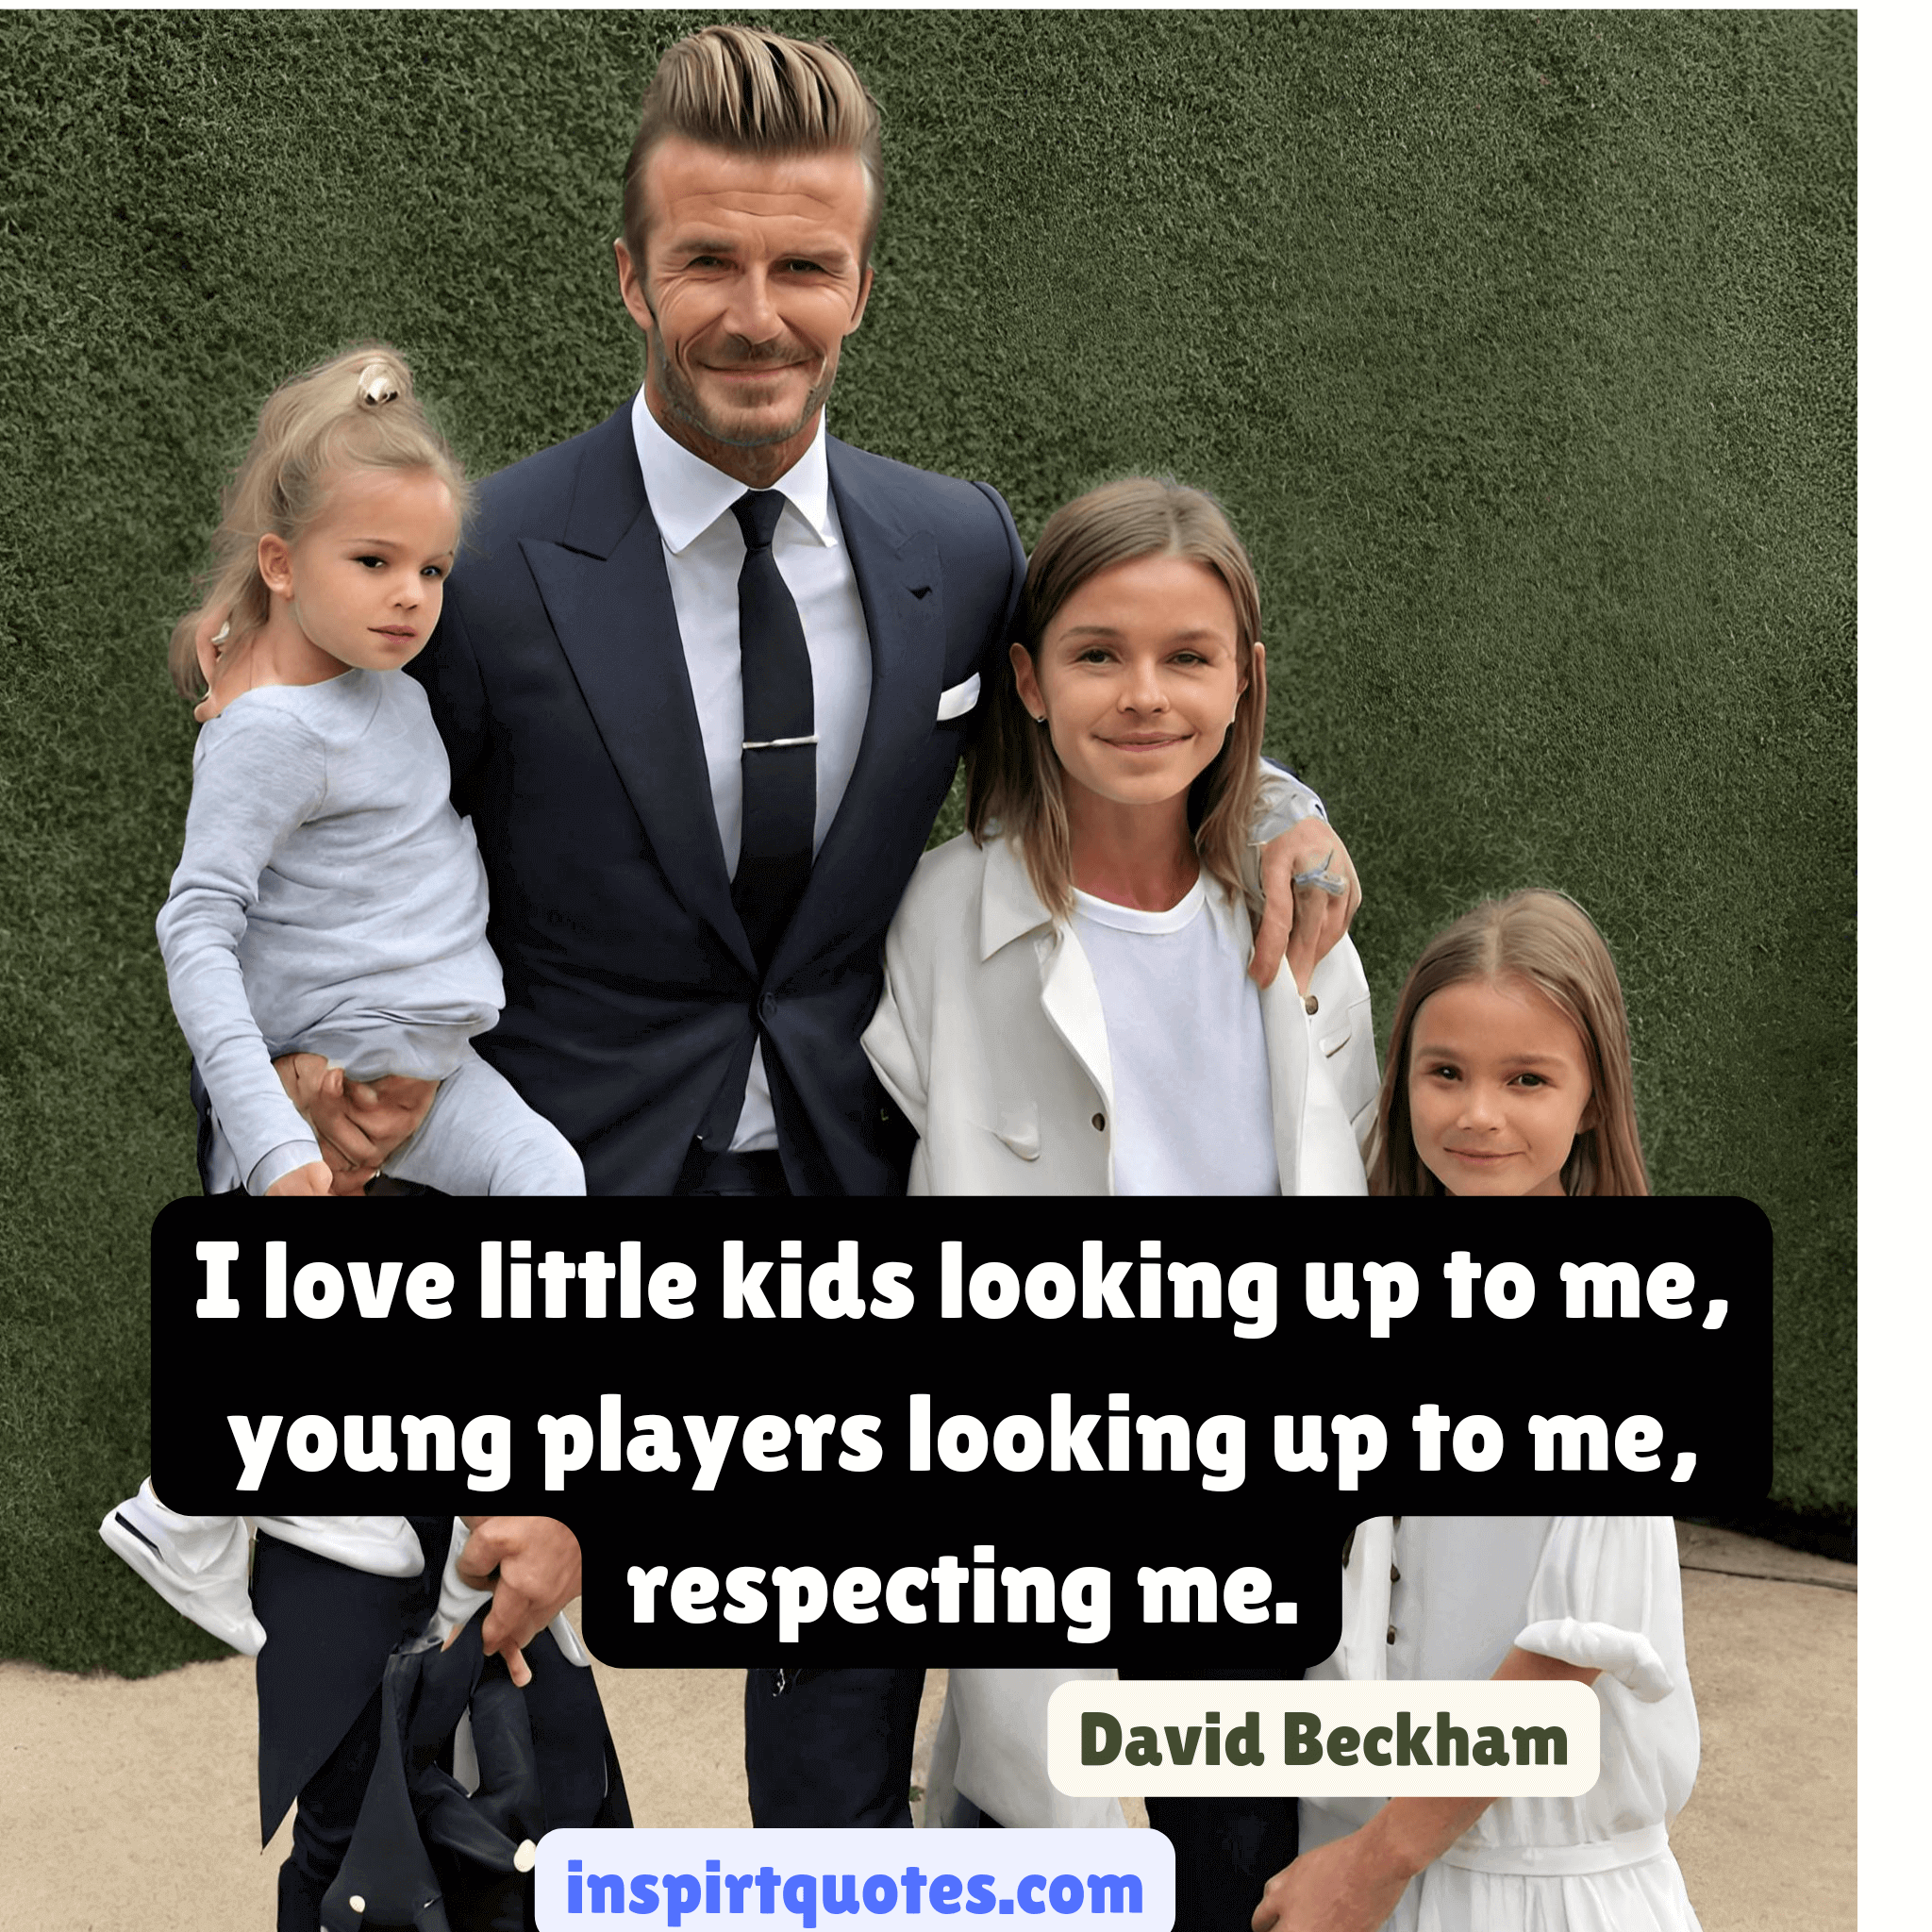 david beckham quotes on football. I love little kids looking up to me, young players looking up to me, respecting me.